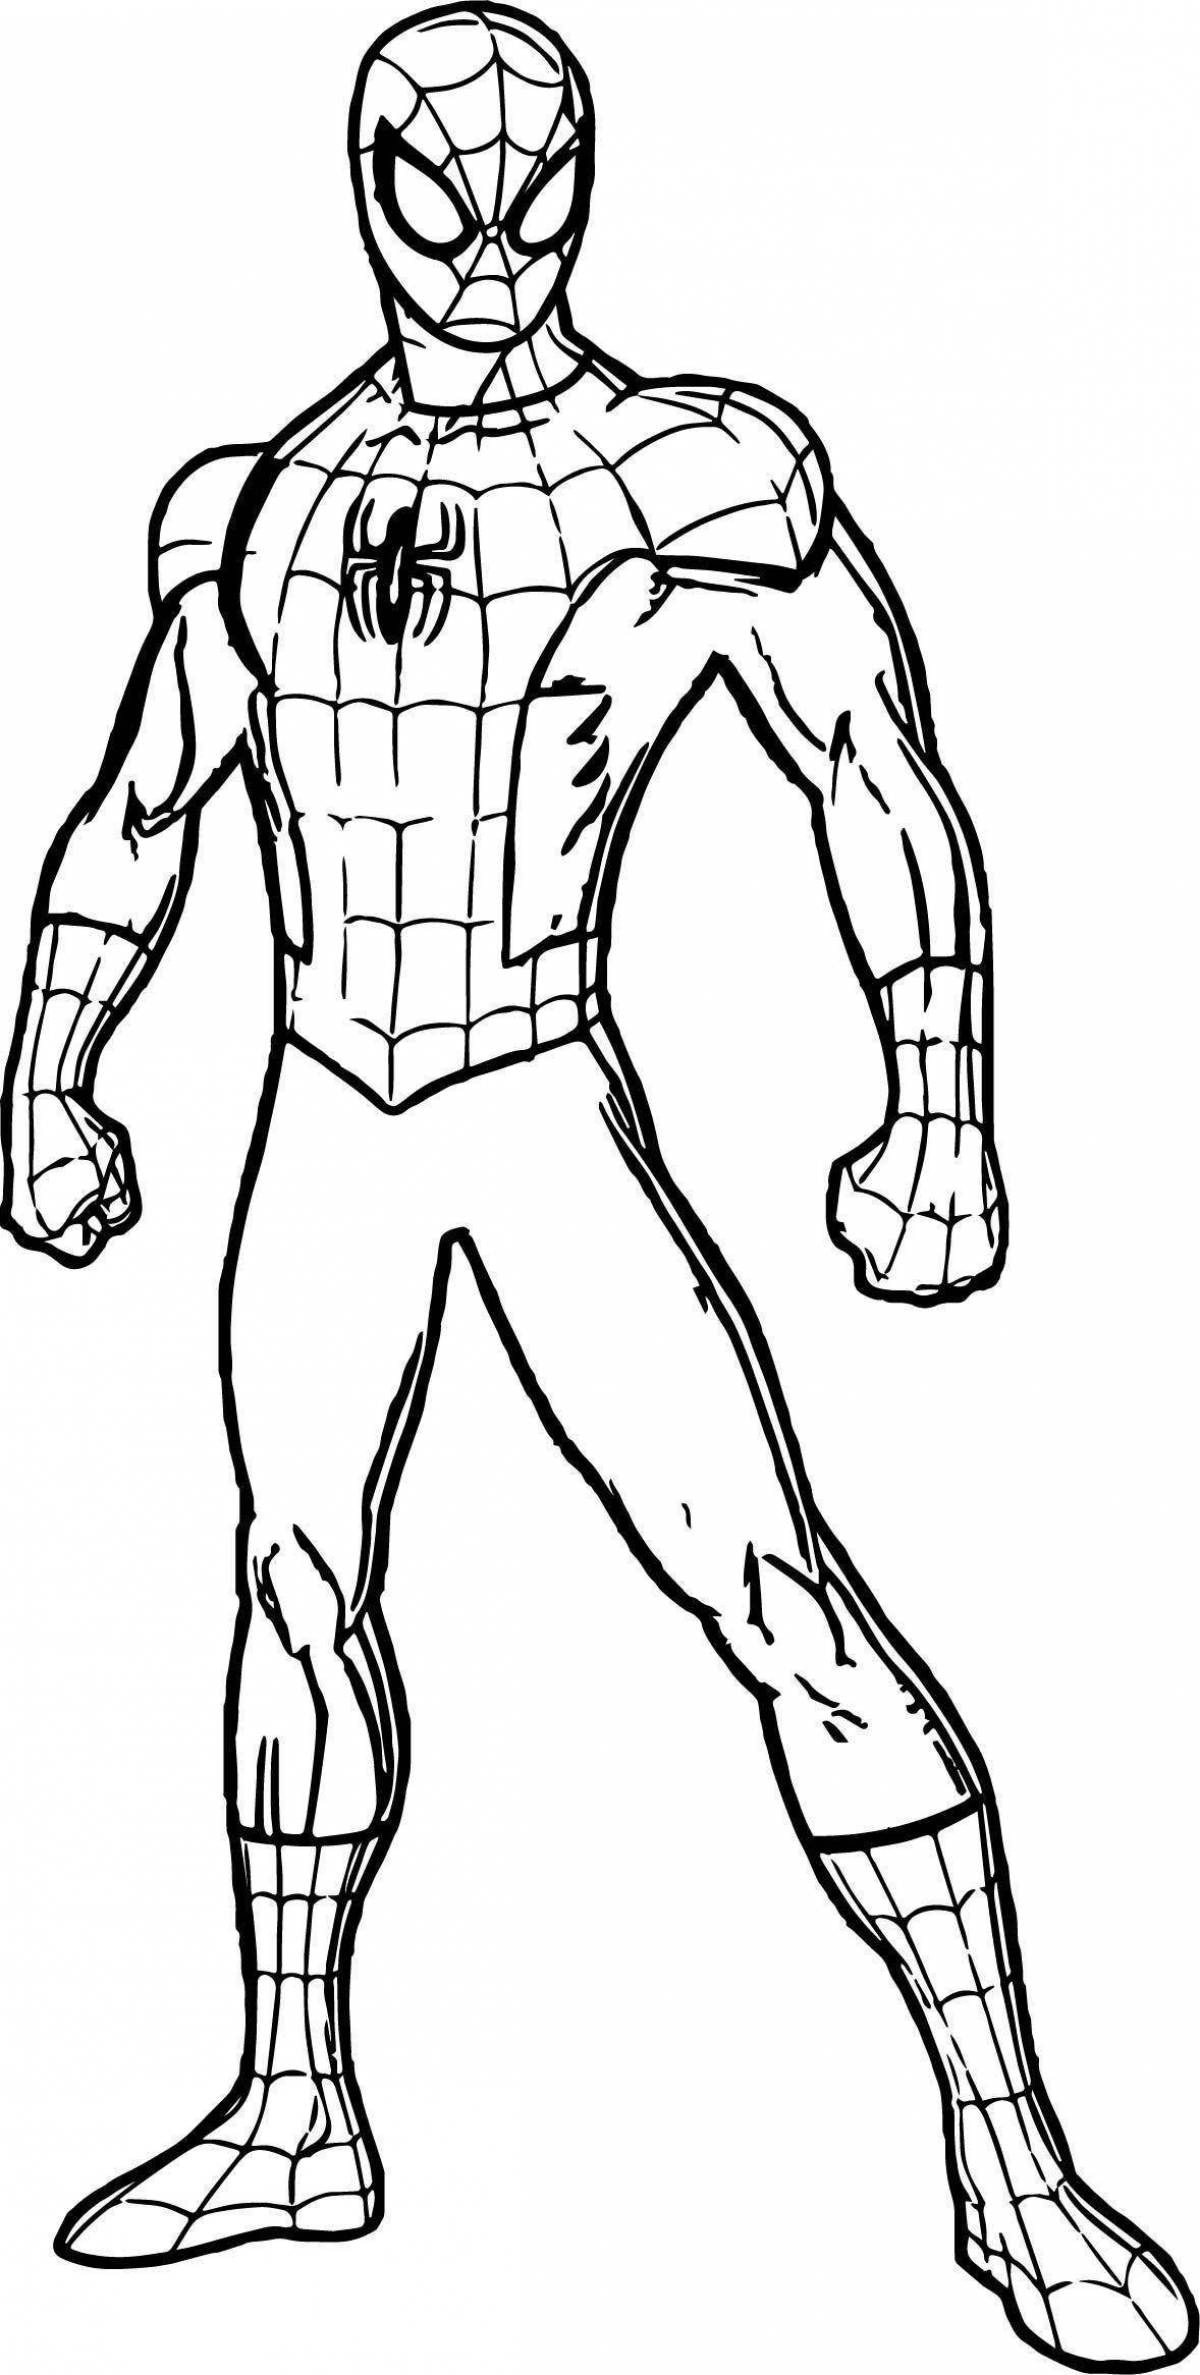 Awesome spiderman coloring page